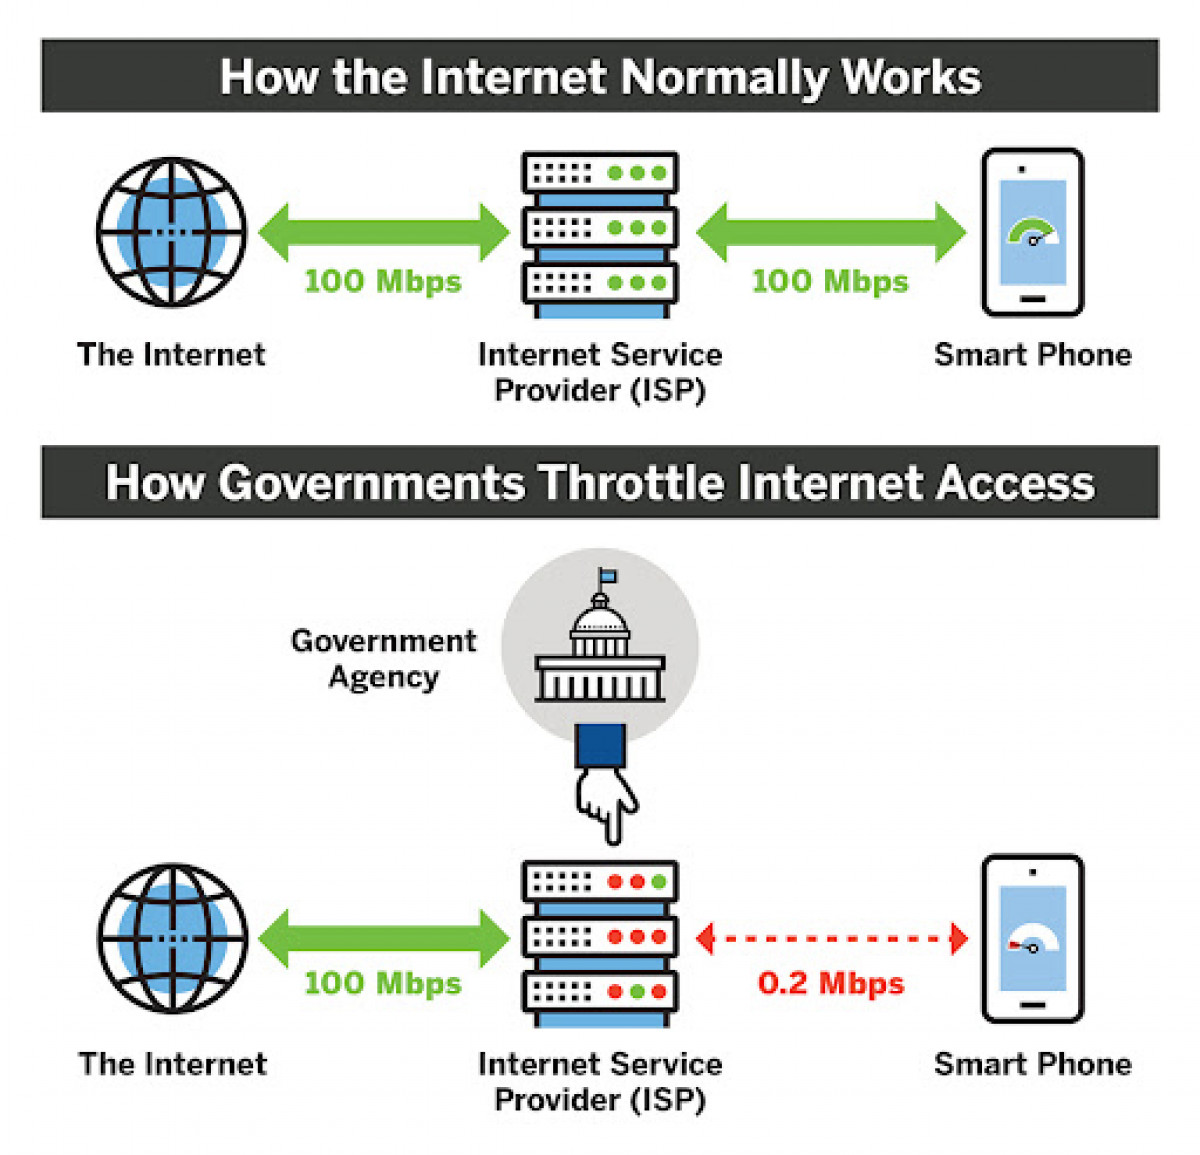 ISPs are sometimes directed by government agencies to throttle users who access restricted content